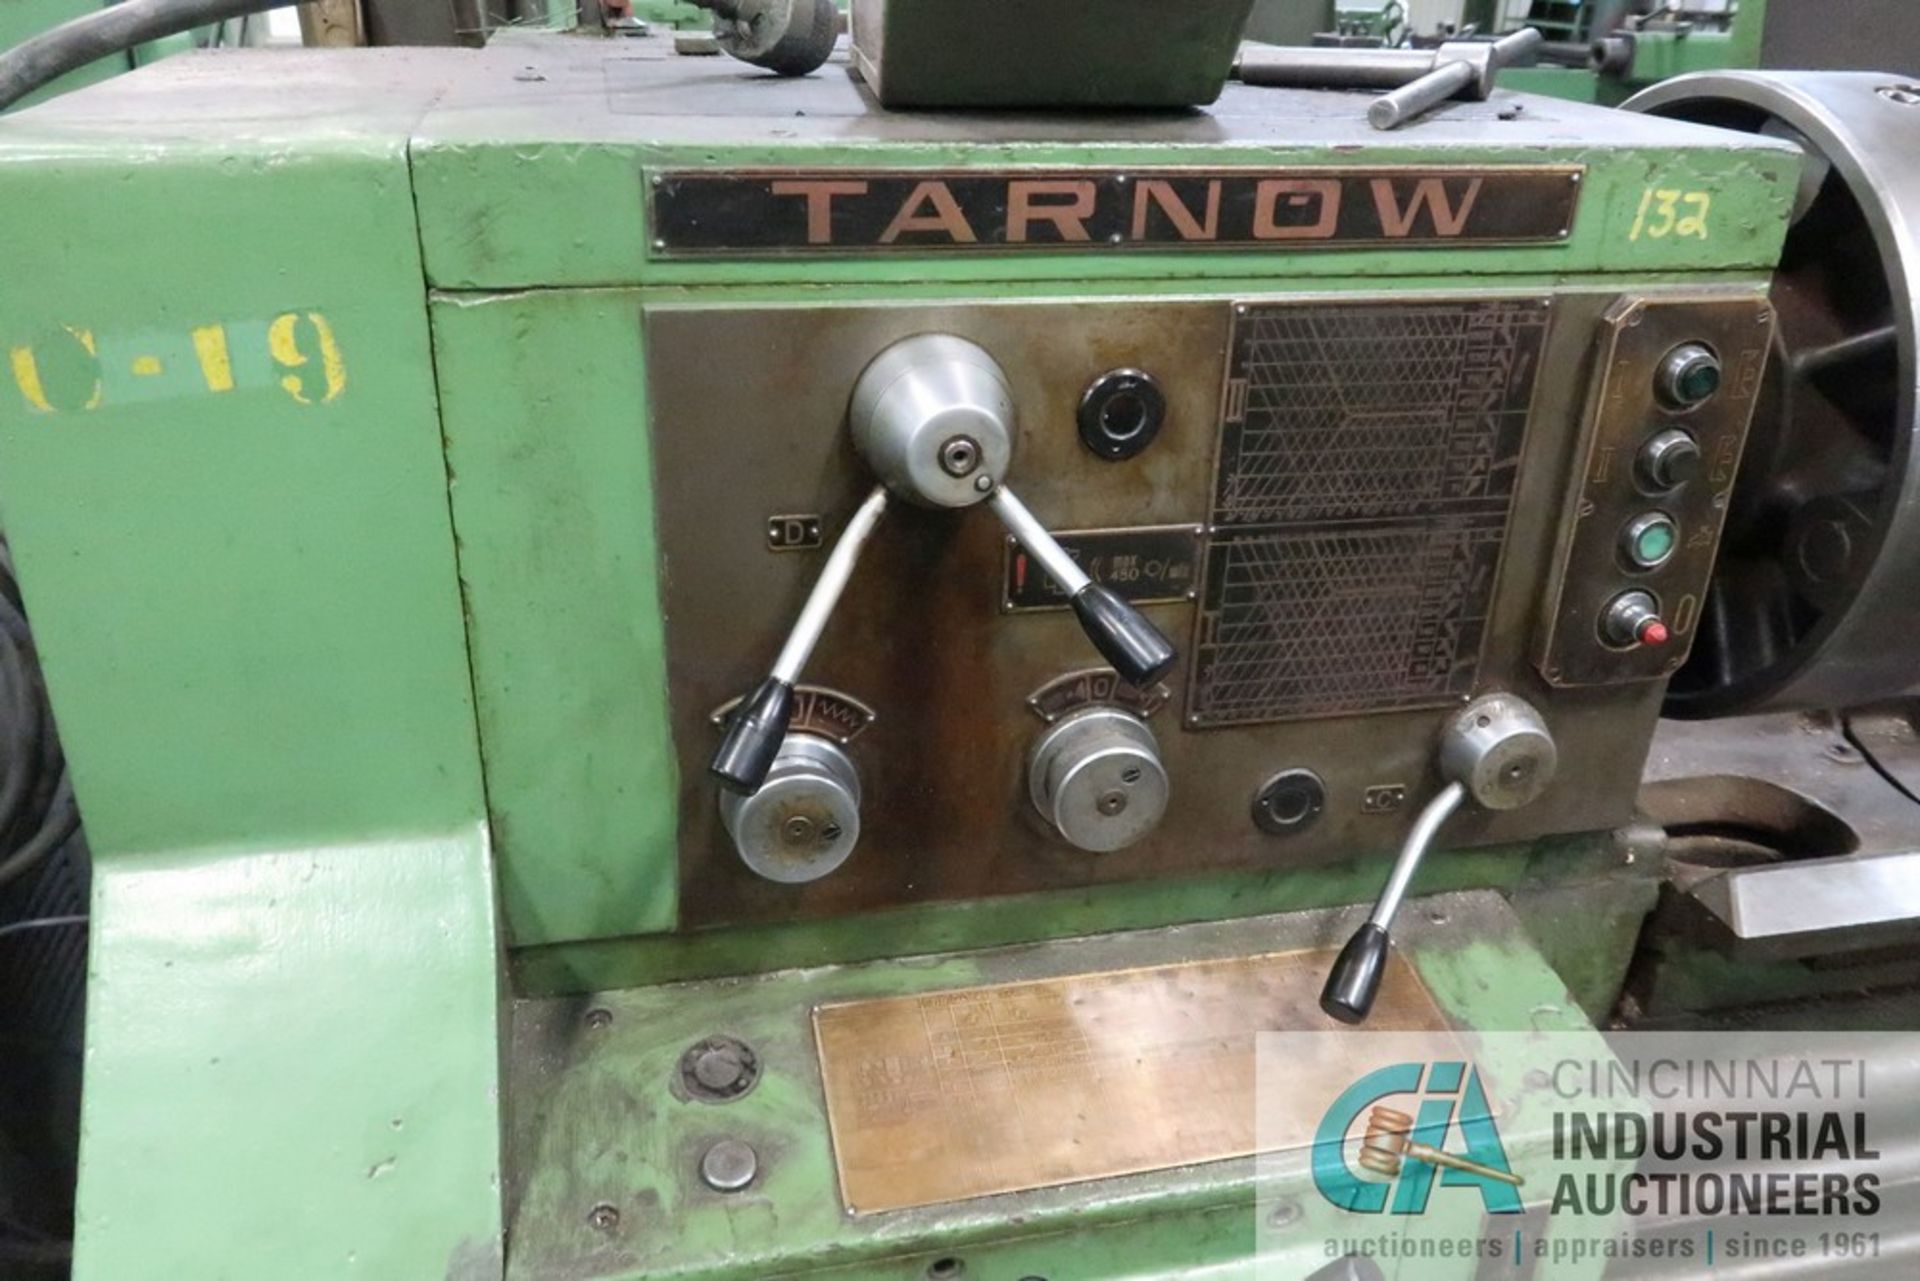 20" X 132" TARNOW ENGINE LATHE; S/N 7667881, 2" SPINDLE HOLE, 16" 4-JAW CHUCK, STEADY REST, - Image 7 of 14